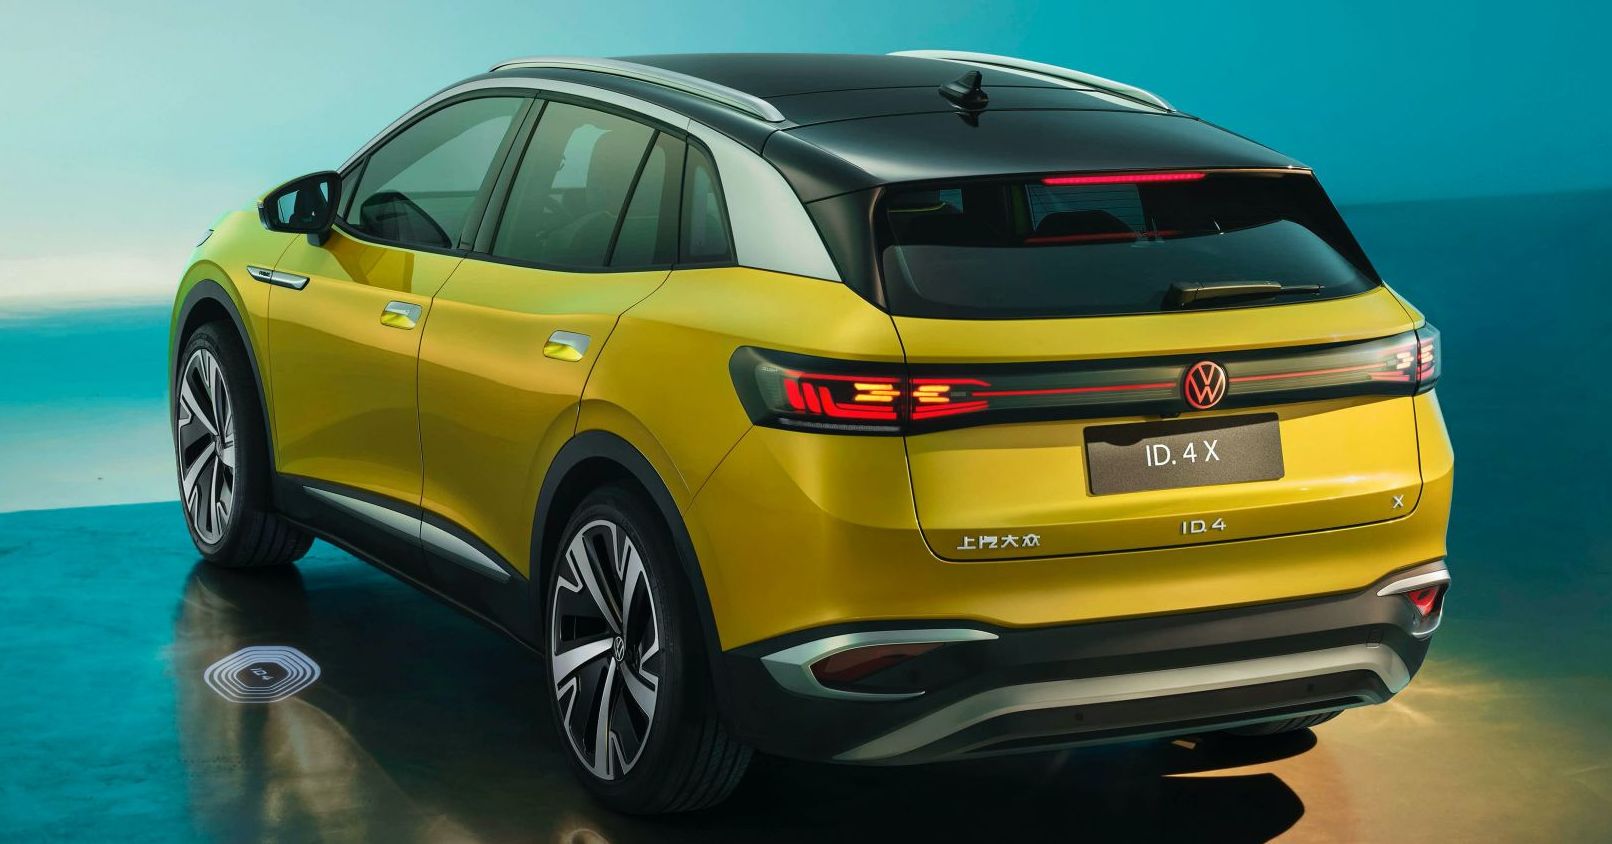 Volkswagen ID.4 X, ID.4 Crozz debut in China up to 550